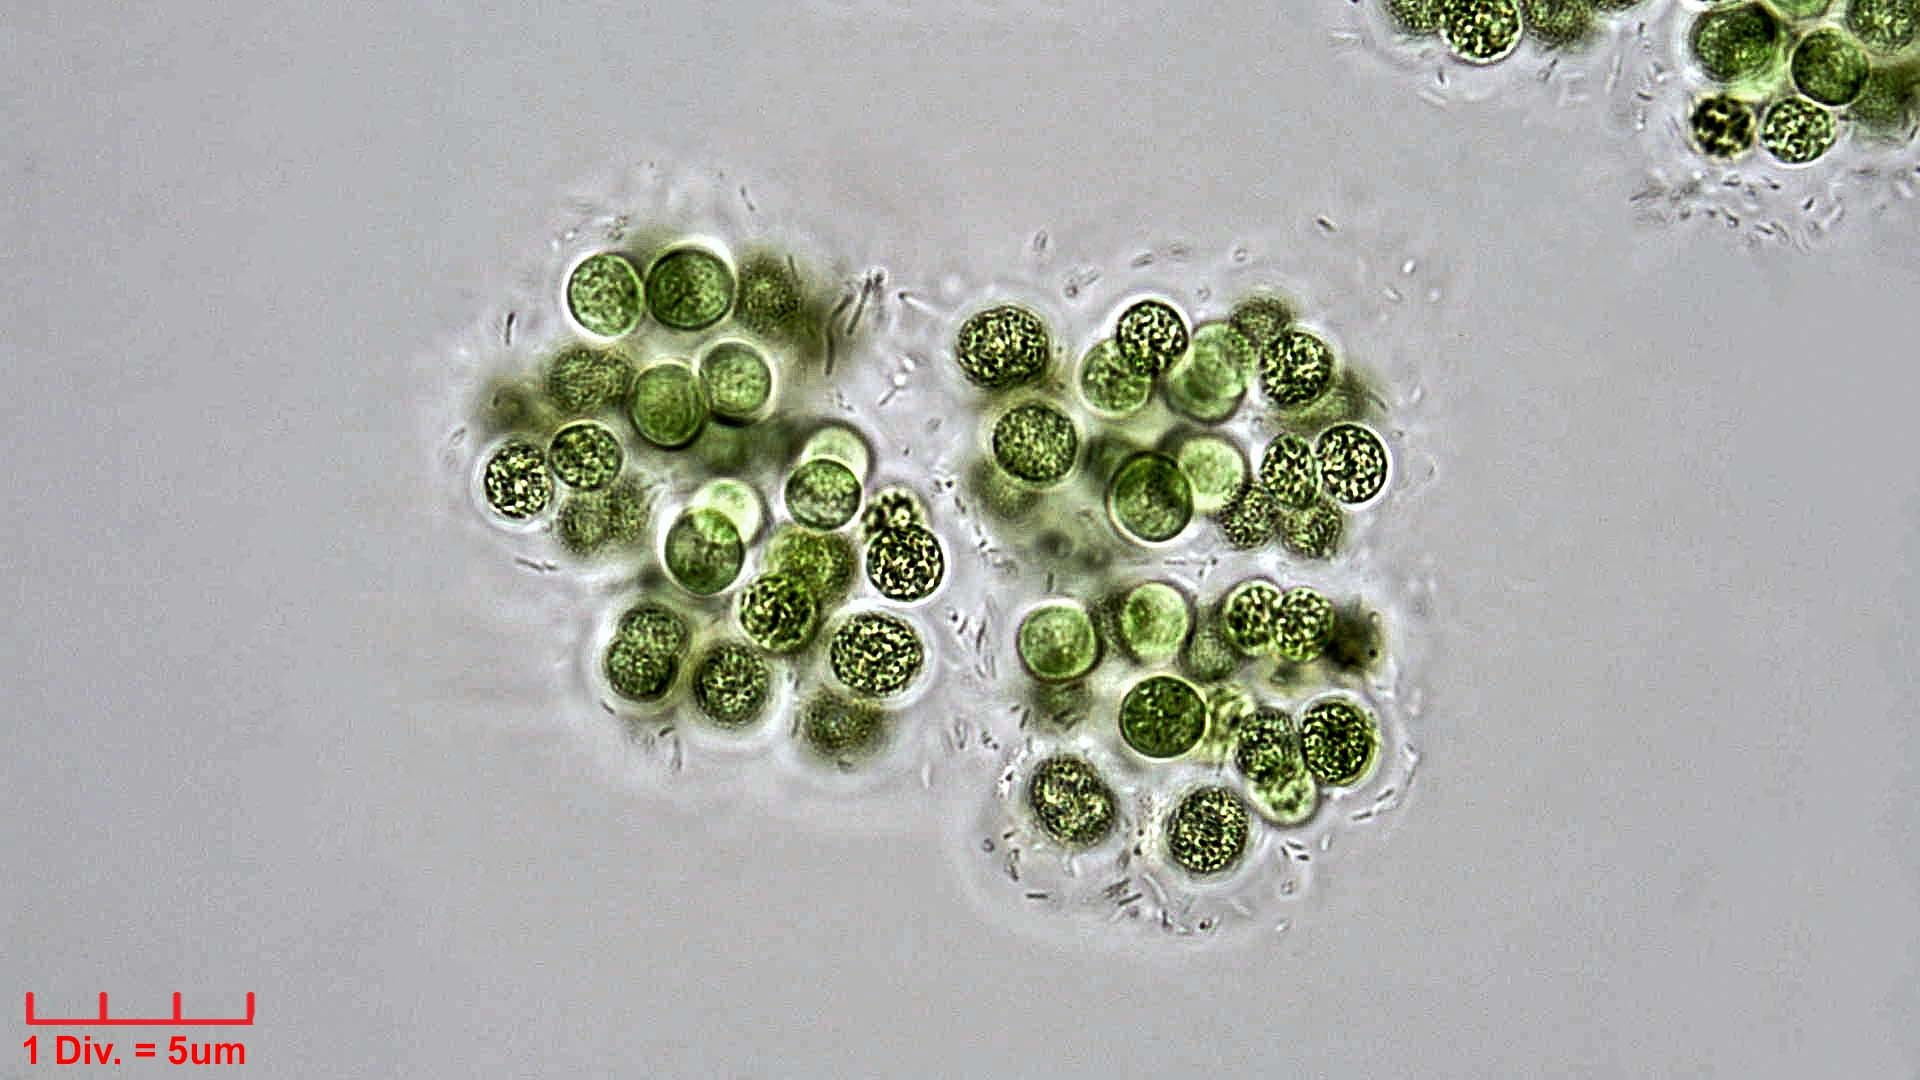 ./Cyanobacteria/Chroococcales/Microcystaceae/Microcystis/viridis/microcystis-viridis-68.jpg